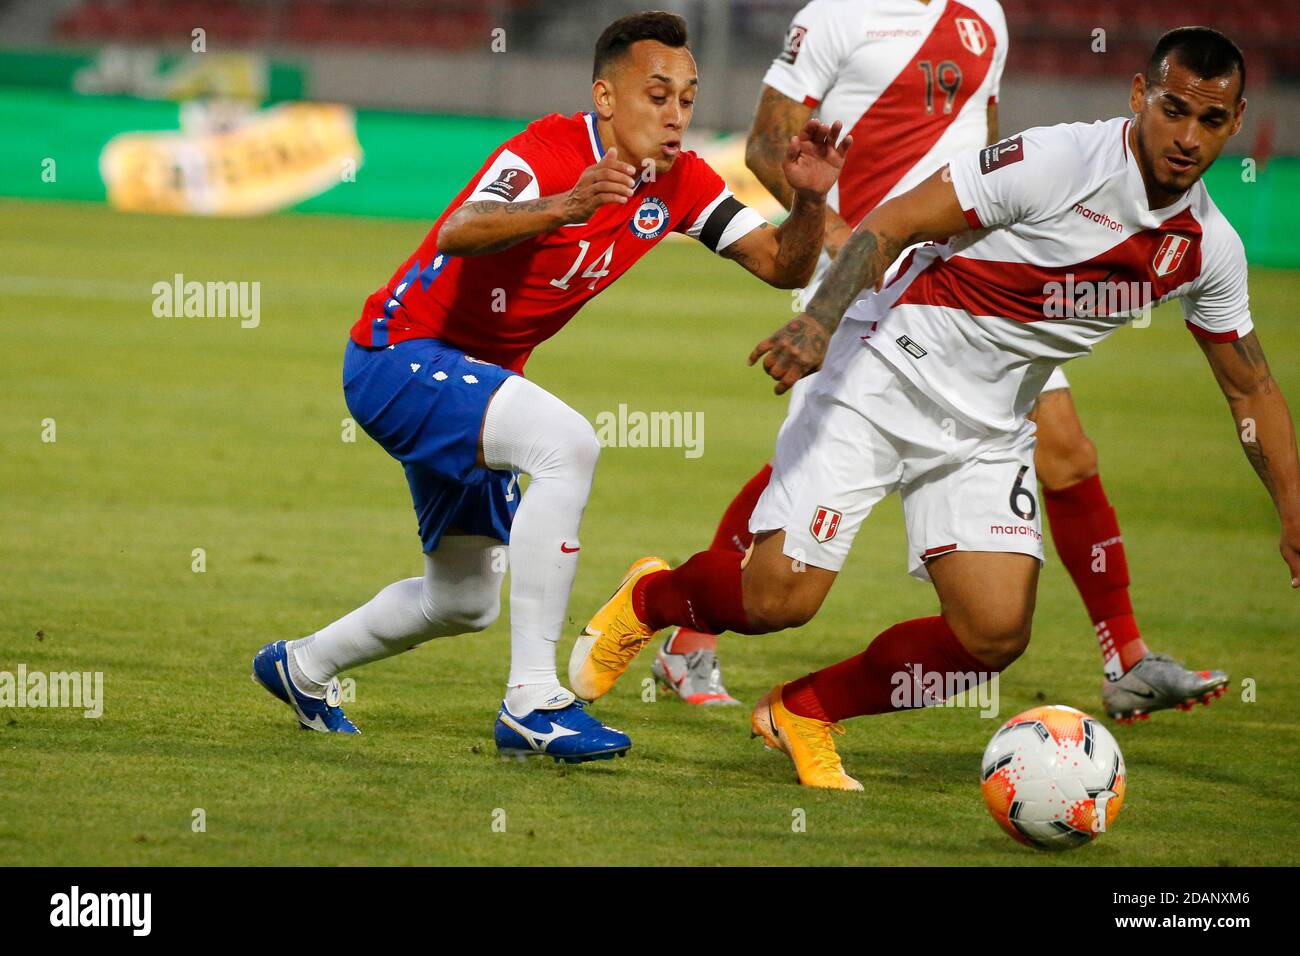 13th November 2020; National Stadium of Santiago, Santiago, Chile; World Cup 2020 Football qualification, Chile versus Peru;  Fabian Orellana of Chile and Miguel Trauco of Peru Stock Photo